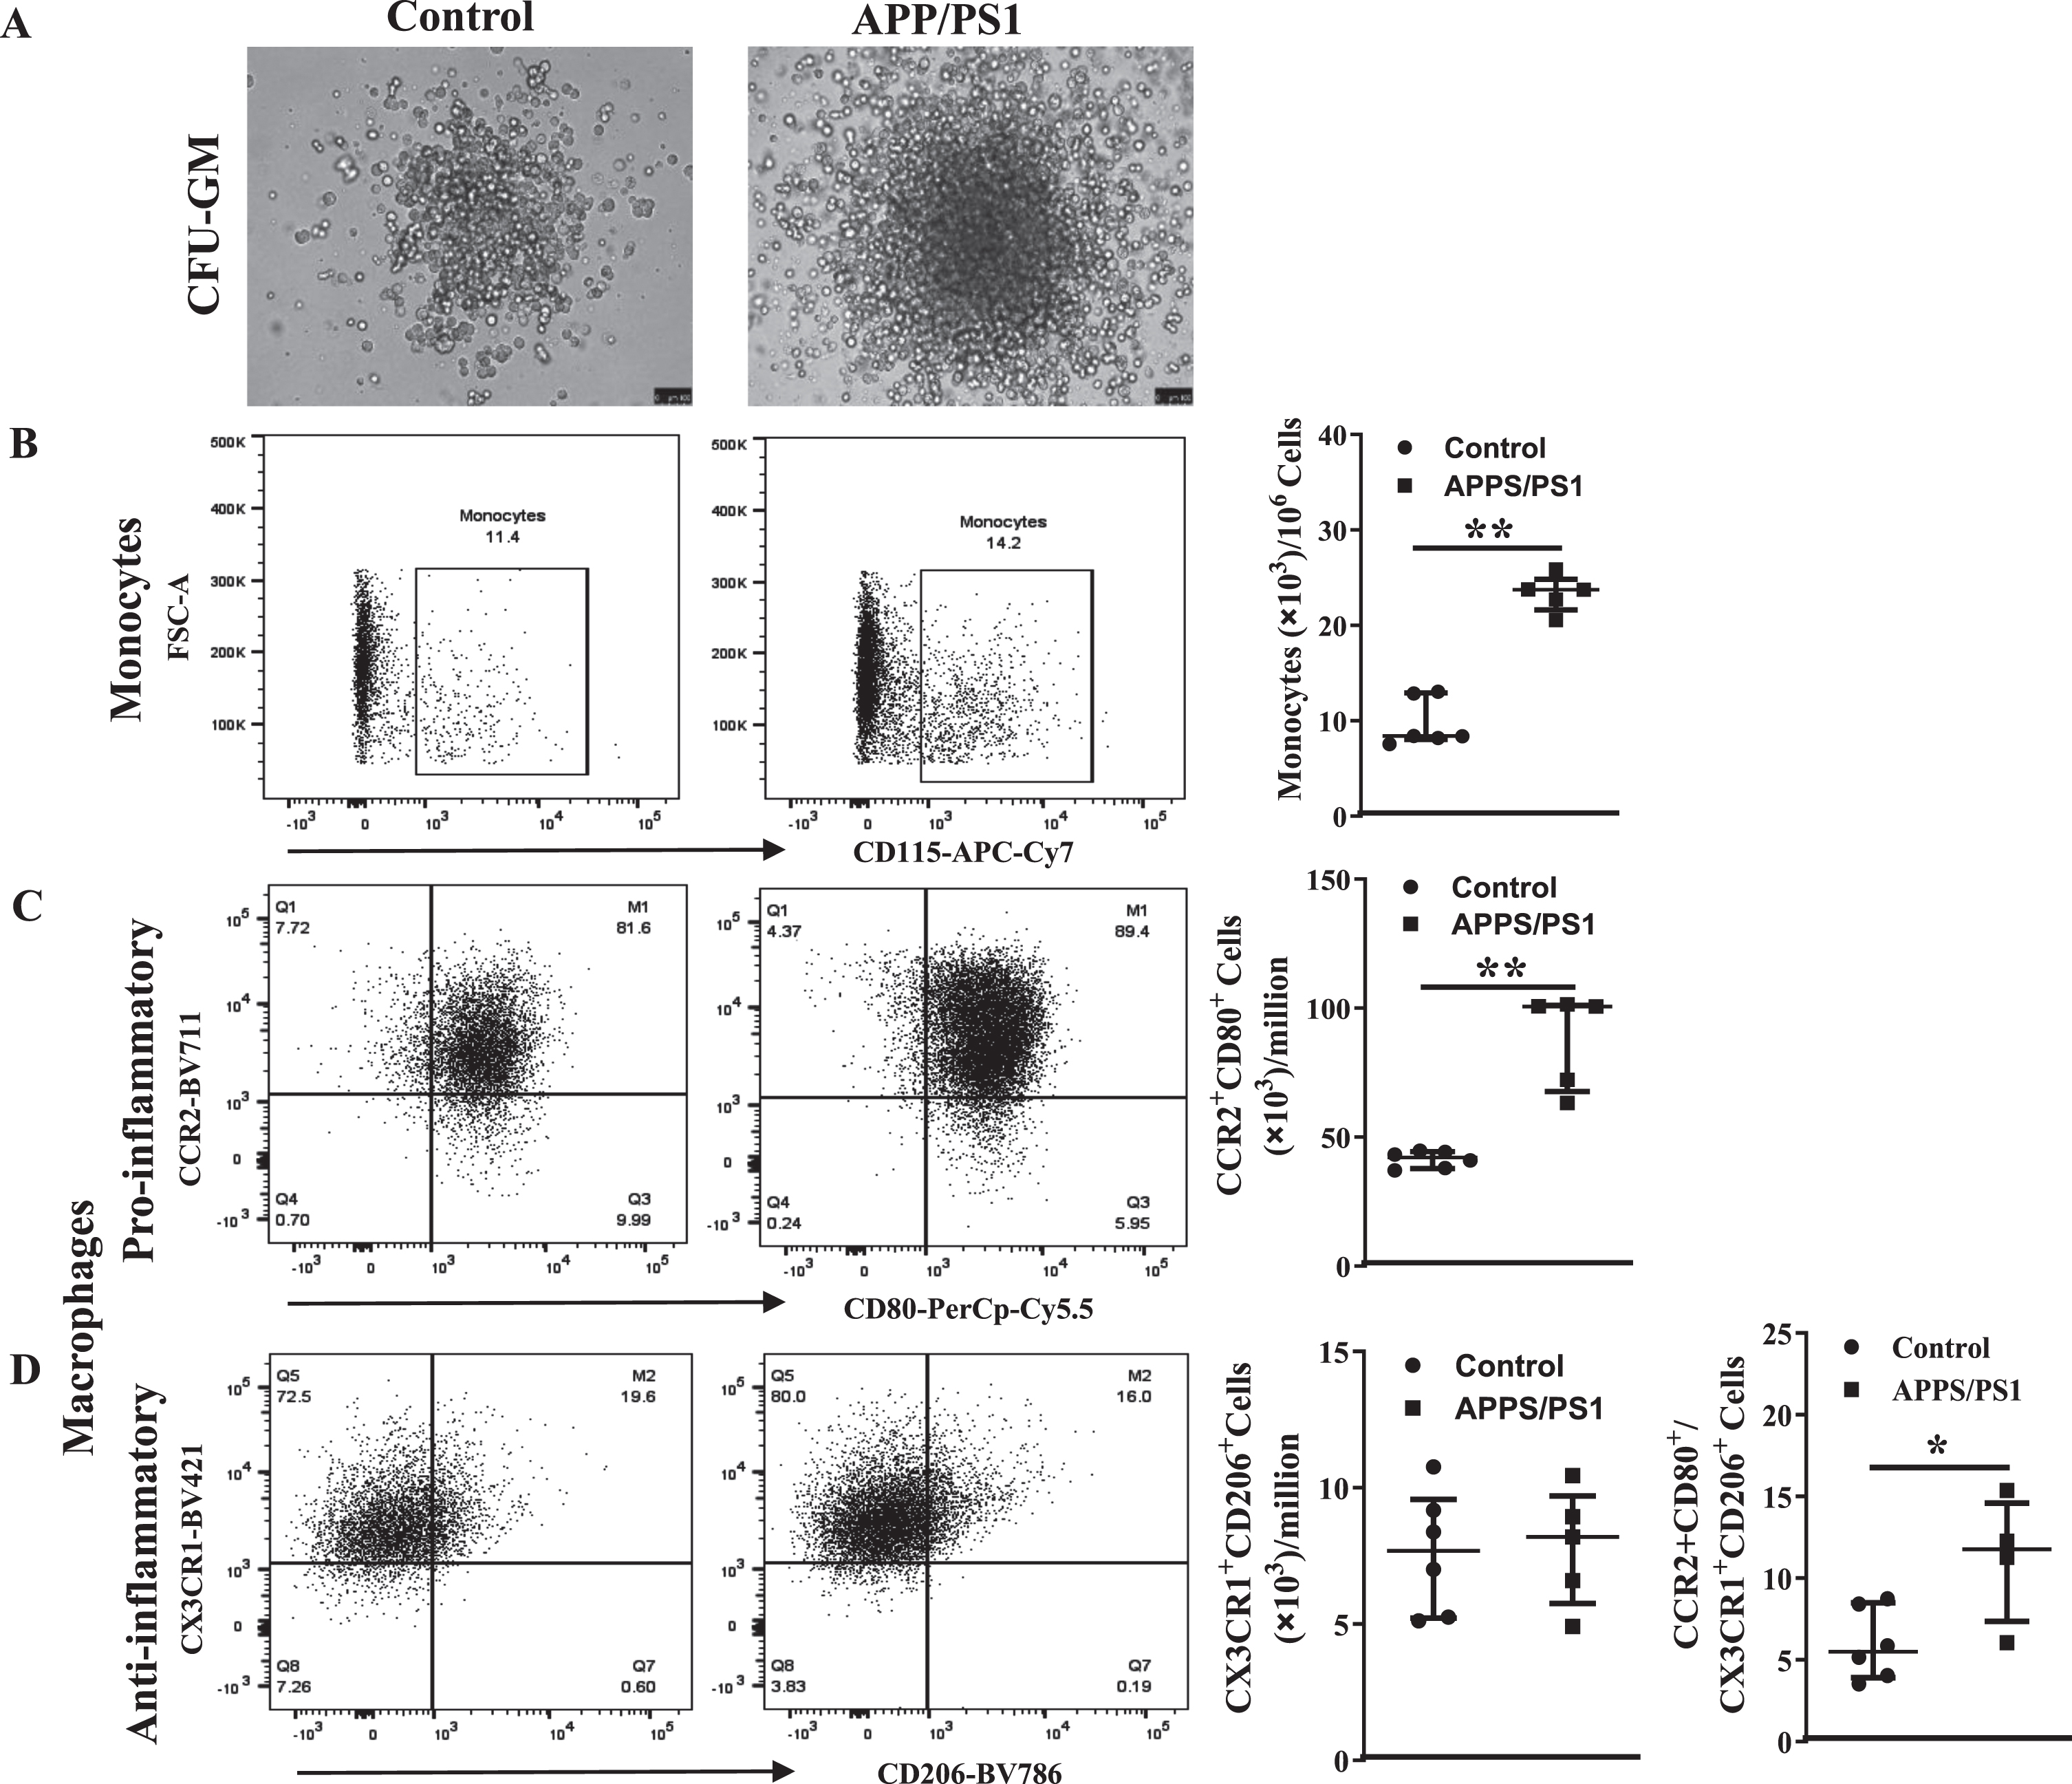 Myeolpoietic potential is higher in the bone marrow cells derived from APP/PS1 mice. A) Shown were representative bright field images of colonies observed in the CFU-GM assay by using the control or APP/PS1 mice bone marrow cells. B-D) Representative flow cytometry dot plots for the enumeration of monocyte-macrophages derived from CFU-GM colonies and the quantification for relative comparison. Monocytes (CD45+Ly6G−Ly6C+CD115+) (B) and the pro-inflammatory macrophages (CD45+CD11b+Ly6G−Ly6C+F4/80+CCR2+CD80+) (C) were higher in the colonies of obtained from APP/PS1 group (**p < 0.01, n = 12 plates/6 mice) compared to controls (n = 10 plates/5 mice) while the anti-inflammatory macrophages (CD45+CD11b+Ly6G−Ly6C+F4/80+CX3CR1+CD206+) (D) were similar in both groups. Ratios of pro-inflammatory macrophage to anti-inflammatory macrophages were significantly higher in colonies derived from APP/PS1 bone marrow cells compared to control (**p < 0.05). Mann-Whitney test was used to test the statistical significance.